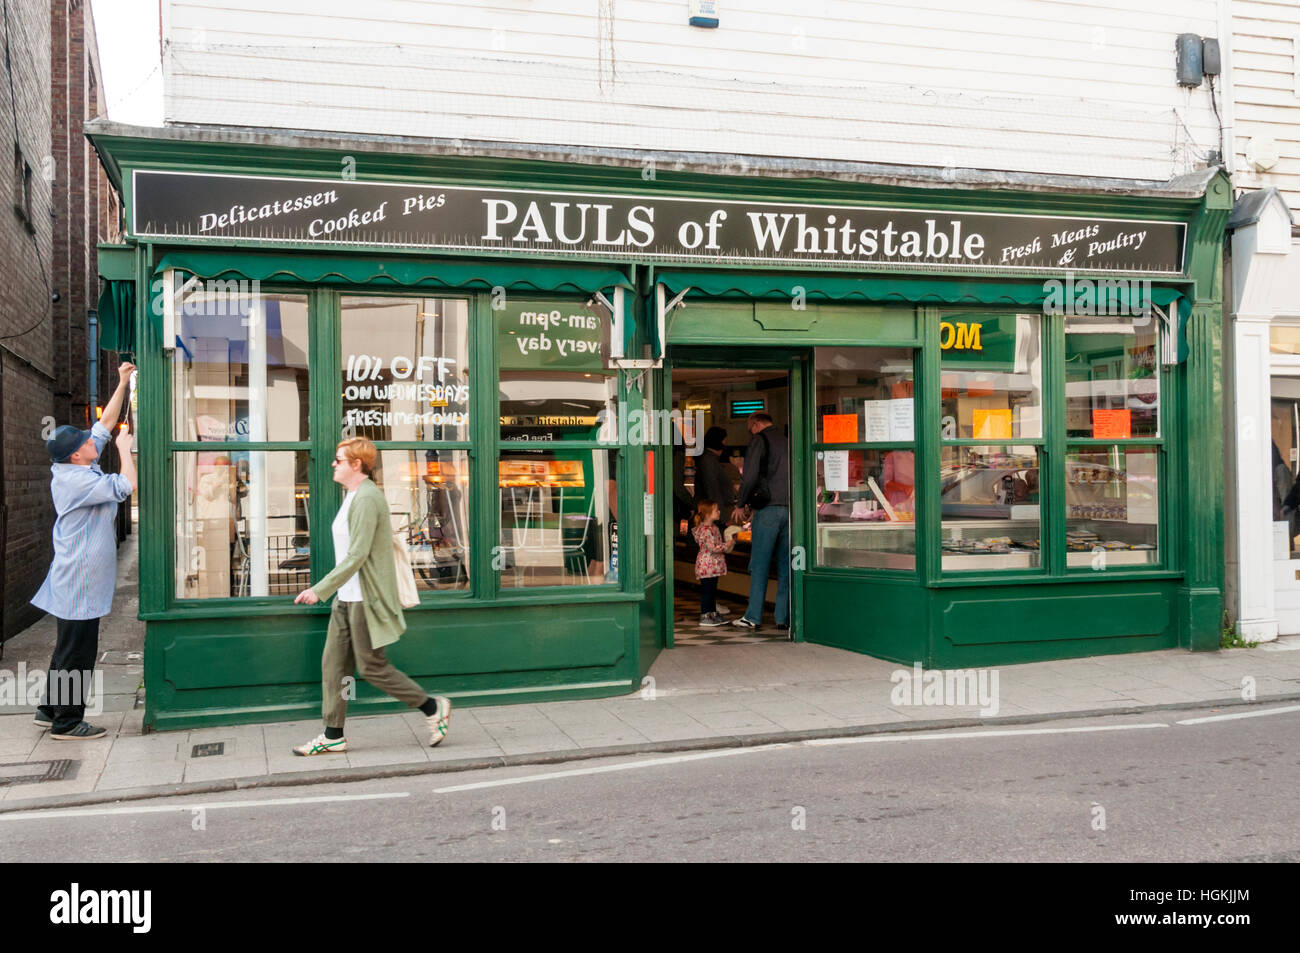 Pauls of Whitstable, a local butchers shop and delicatessen. Stock Photo